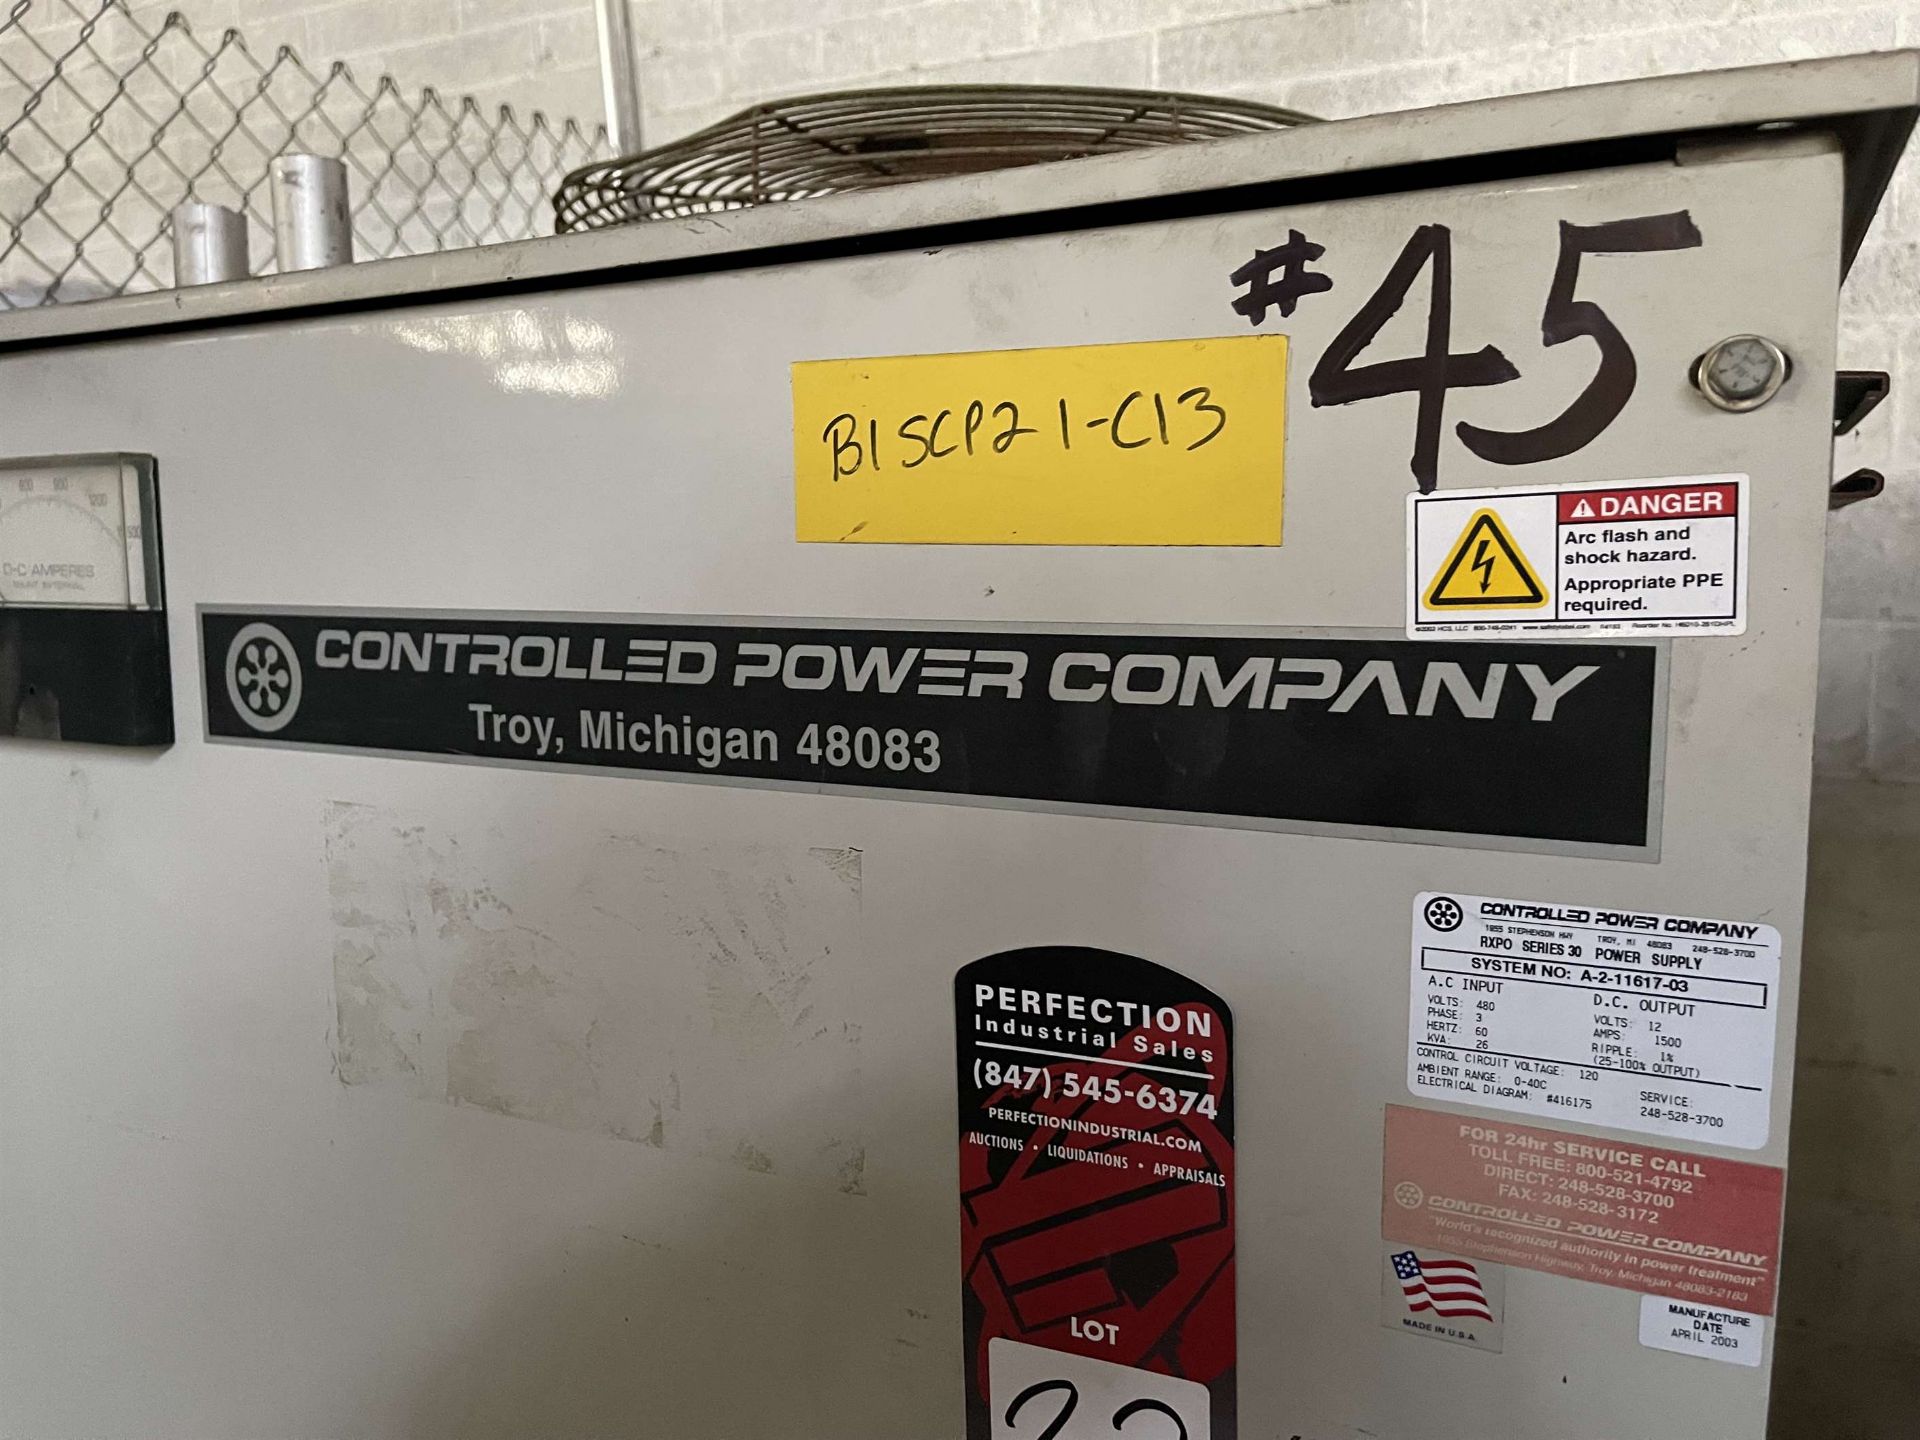 CONTROLLED POWER COMPANY RXPO Series 30 DC Power Supply, s/n A-2-11617-03, 1500 Amp DC Output, 12V - Image 2 of 6